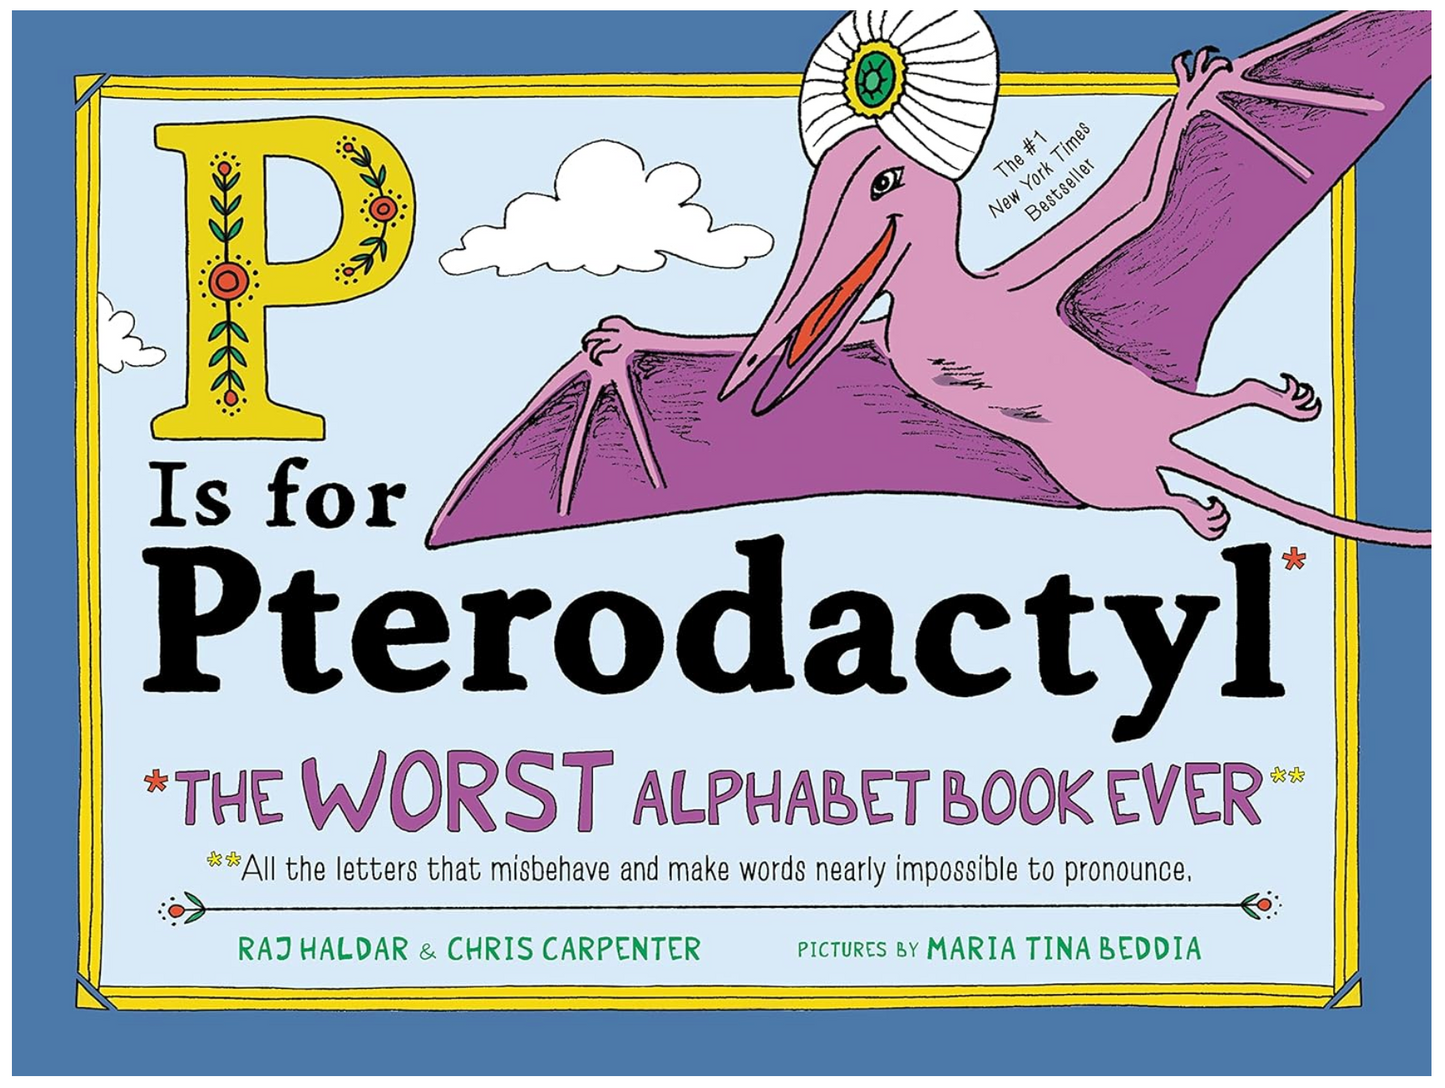 P is for Pterodactyl Book